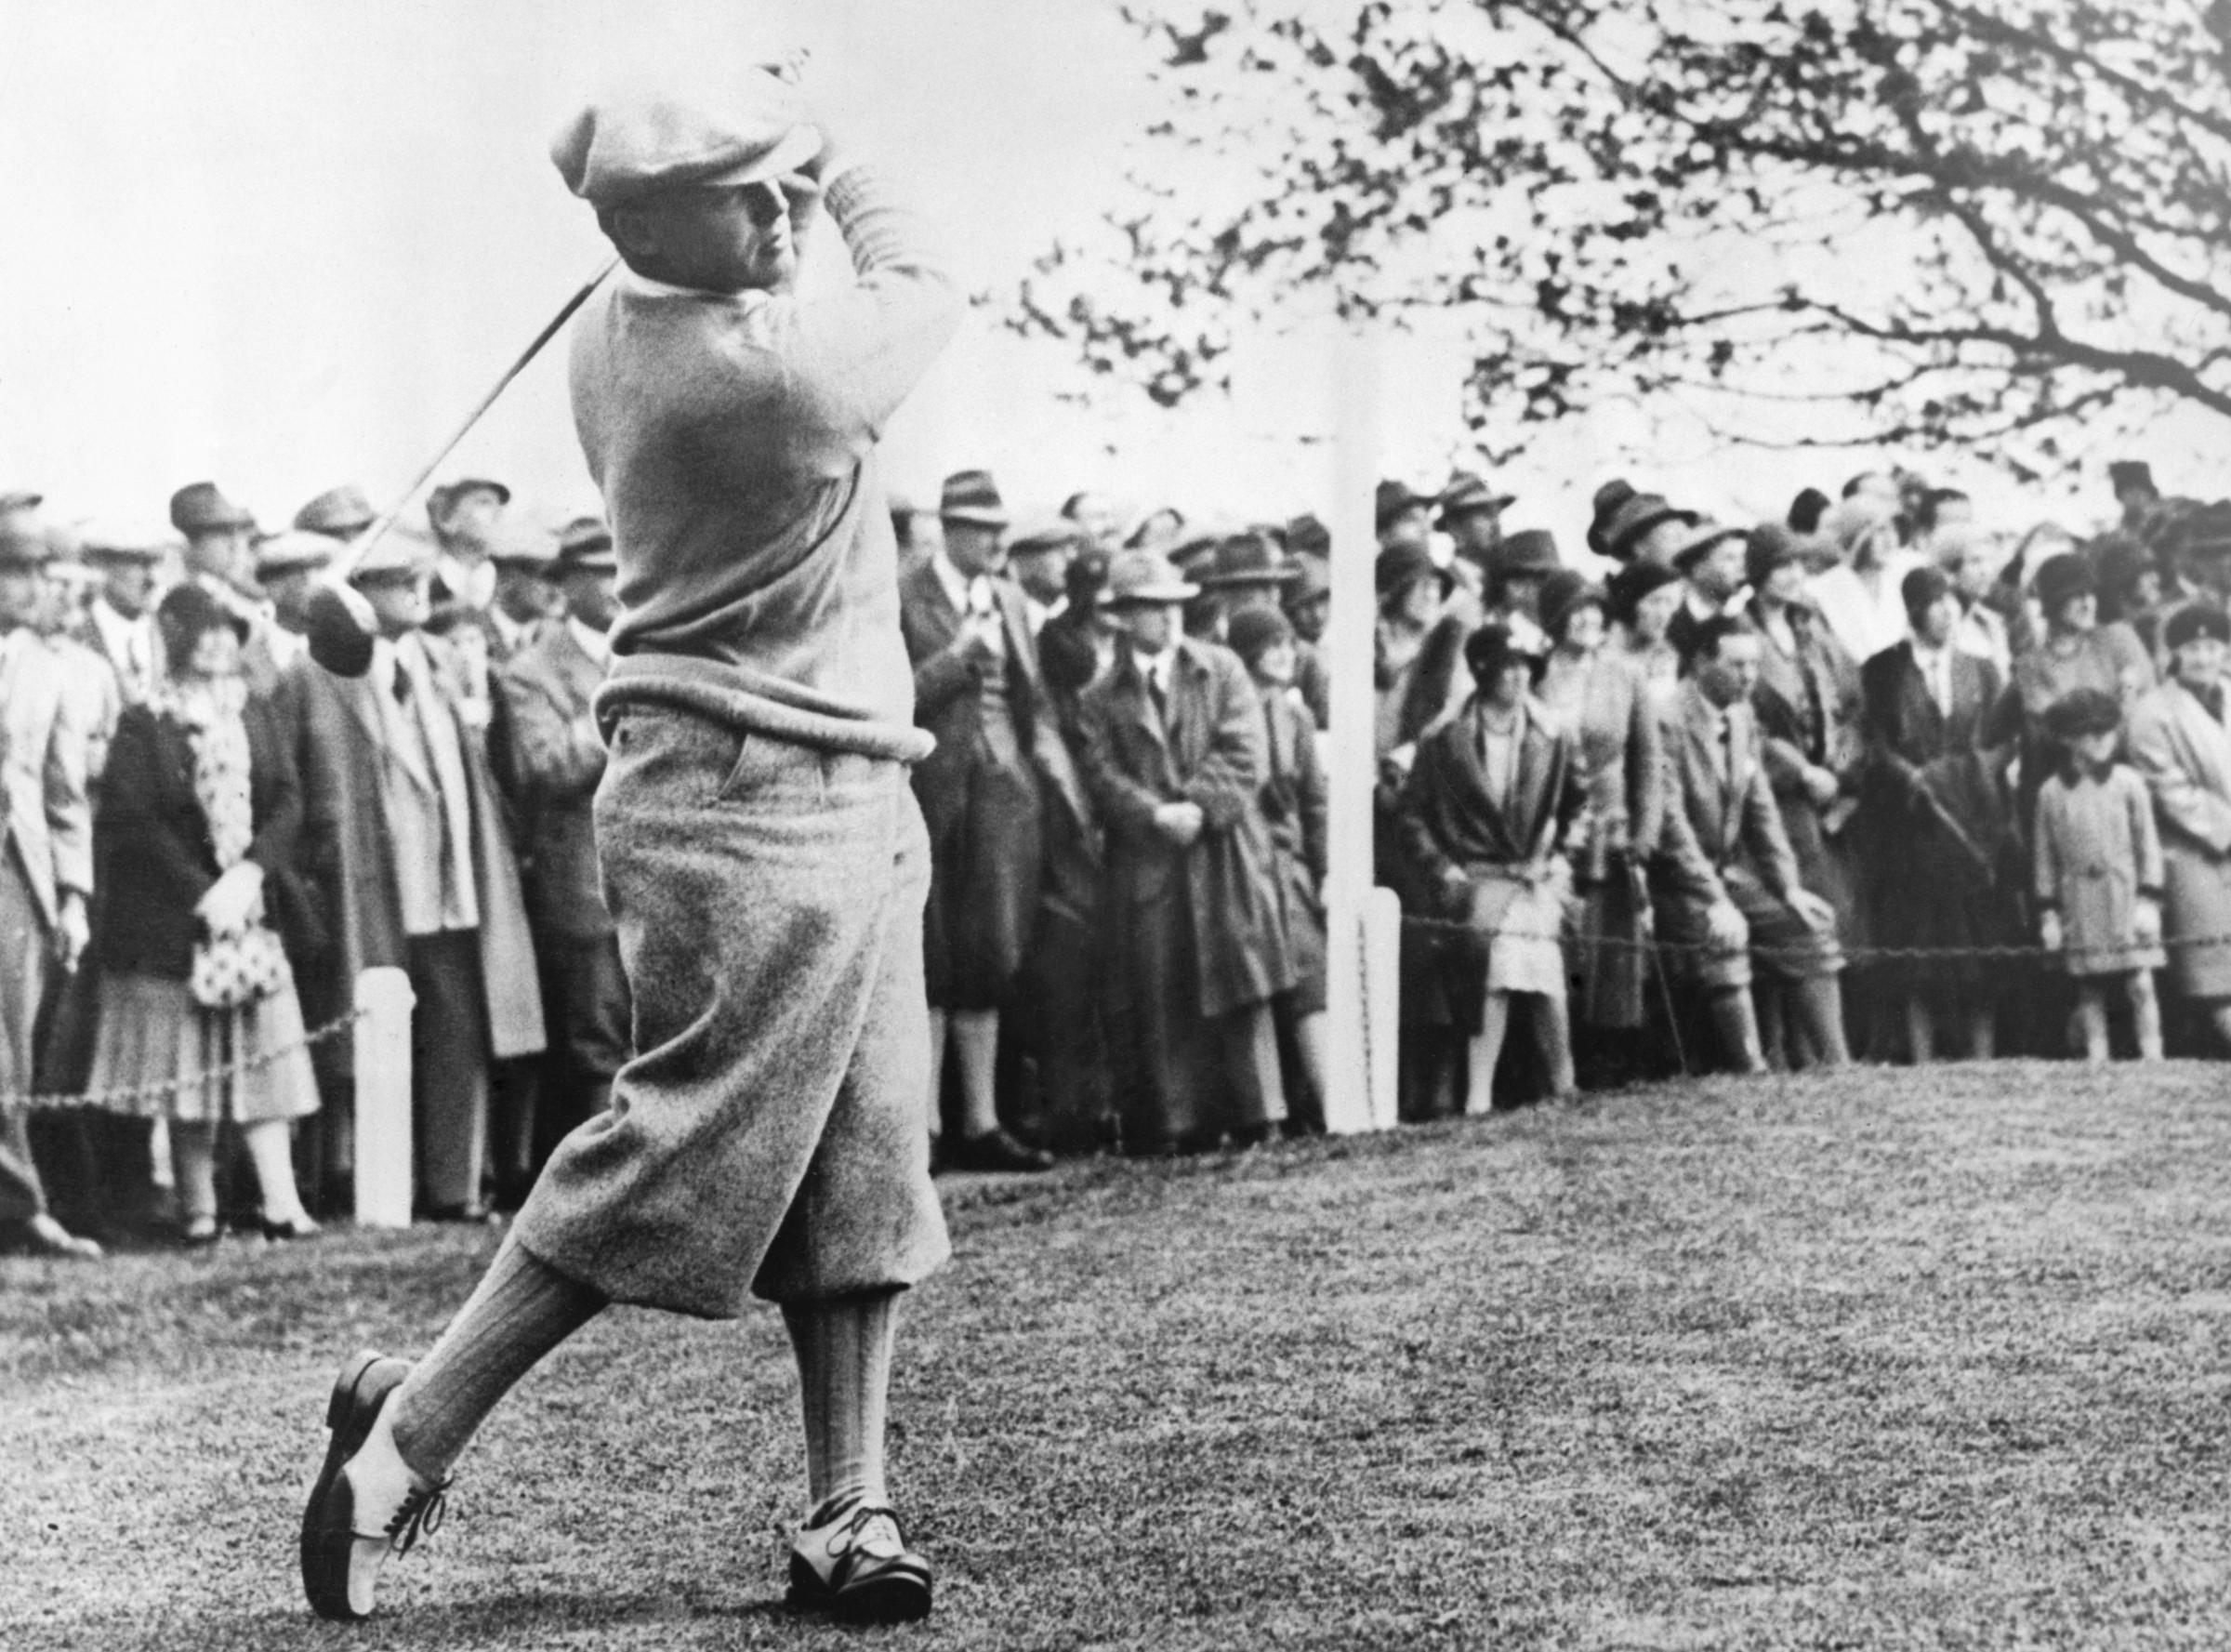 ca. 1900s --- Original caption: Bobby Jones (b. 1902) American golfer and only player ever to make the "Grand Slam". Photograph full-length swinging golf club. --- Image by © Corbis